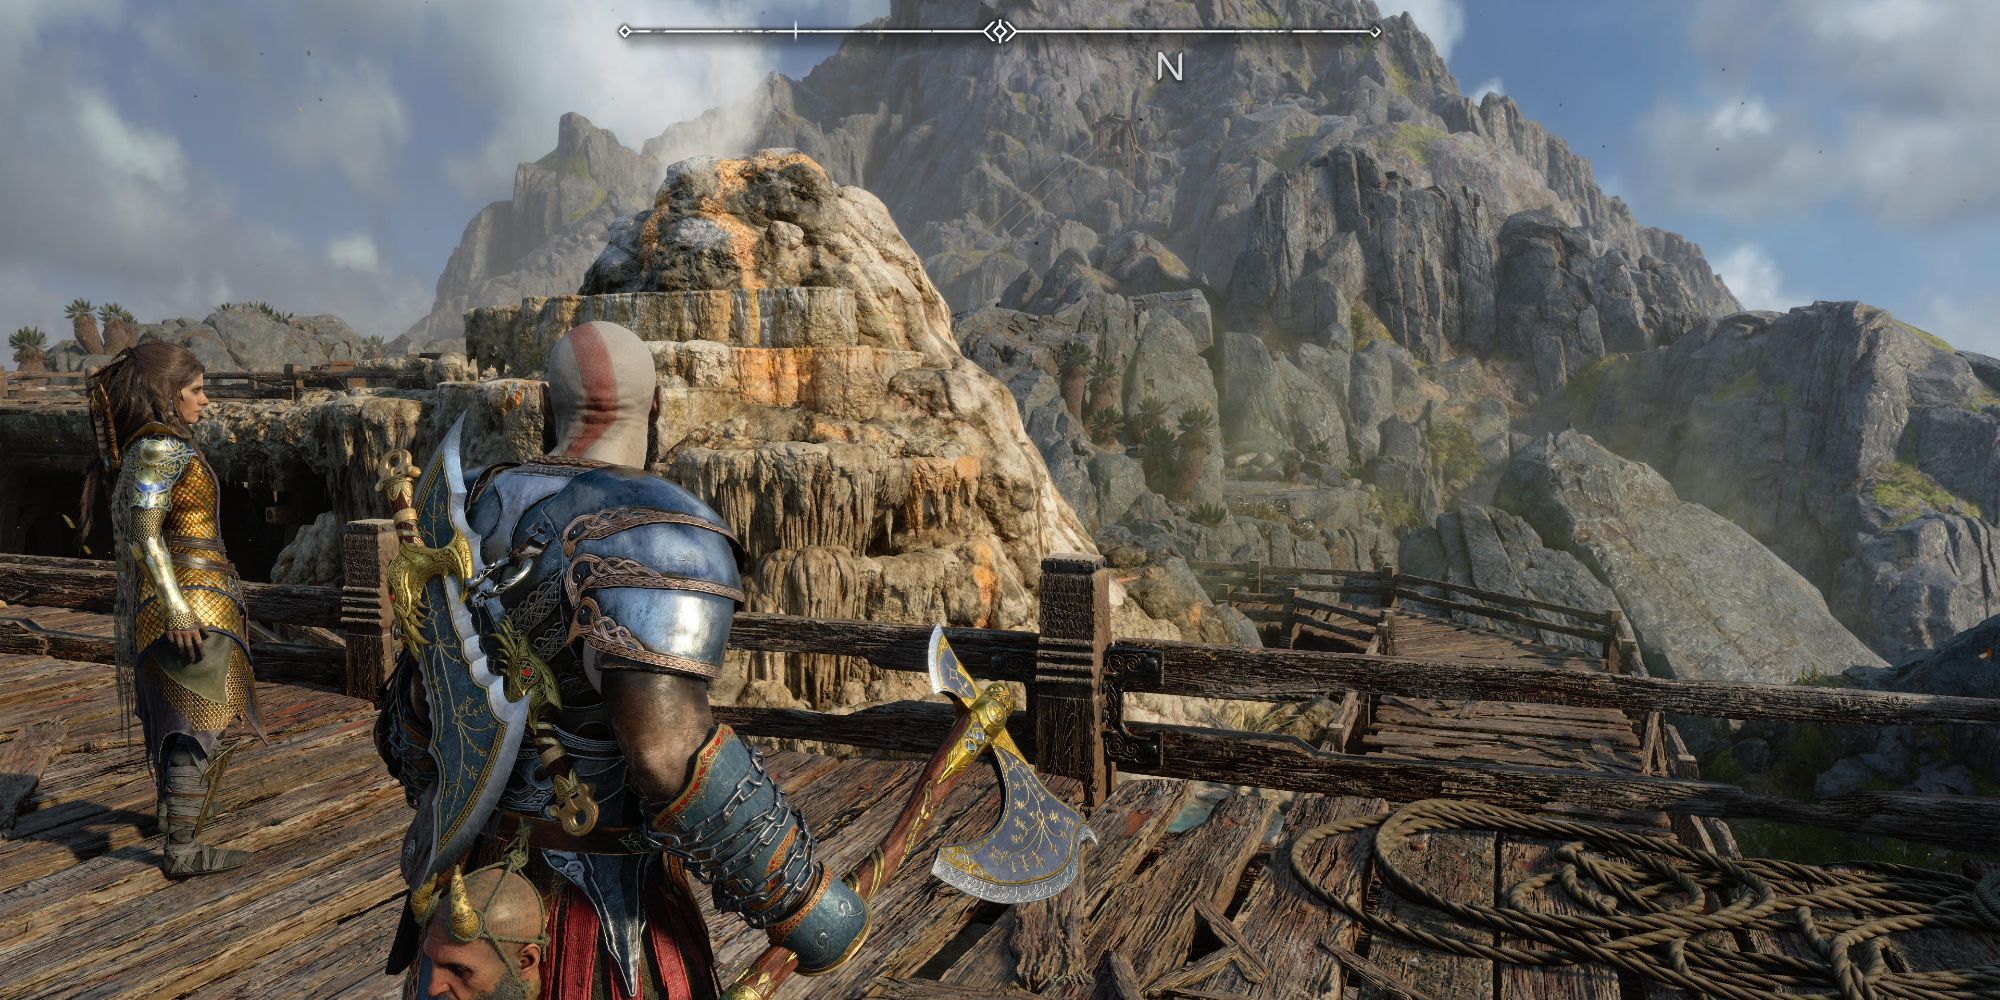 Kratos stands at the path towards the Forge, a location in Svartalfheim